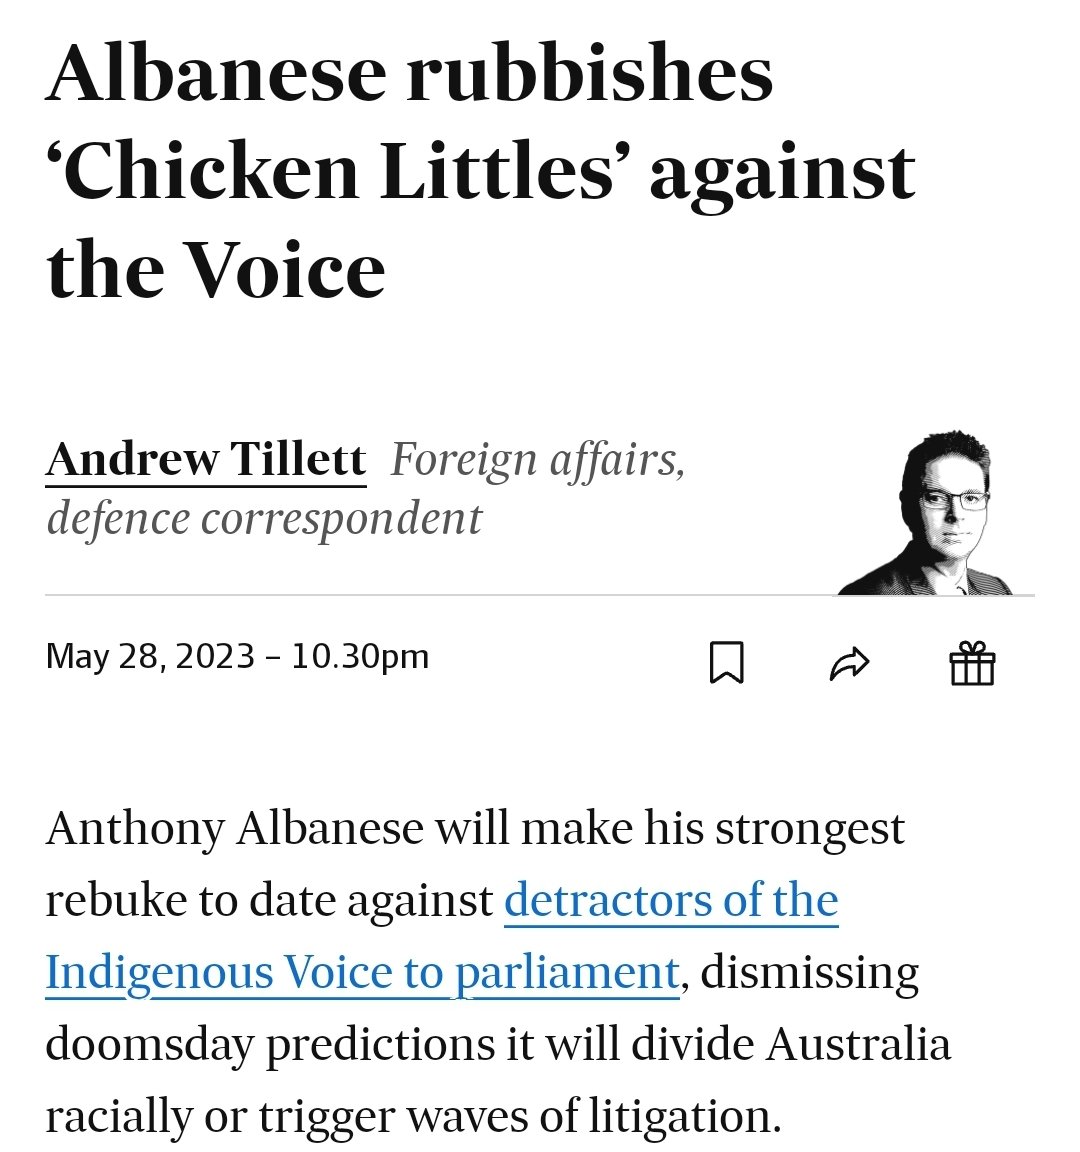 Hi @elonmusk I see the communist here in Australia have ratcheted up the attacks on you and X 'Criminals and Cranks' 😂🥴

Don't worry, Anthony Albanese called 60% of Australians cookers and chicken littles when he was asking us to divide our nation on the premise of race....